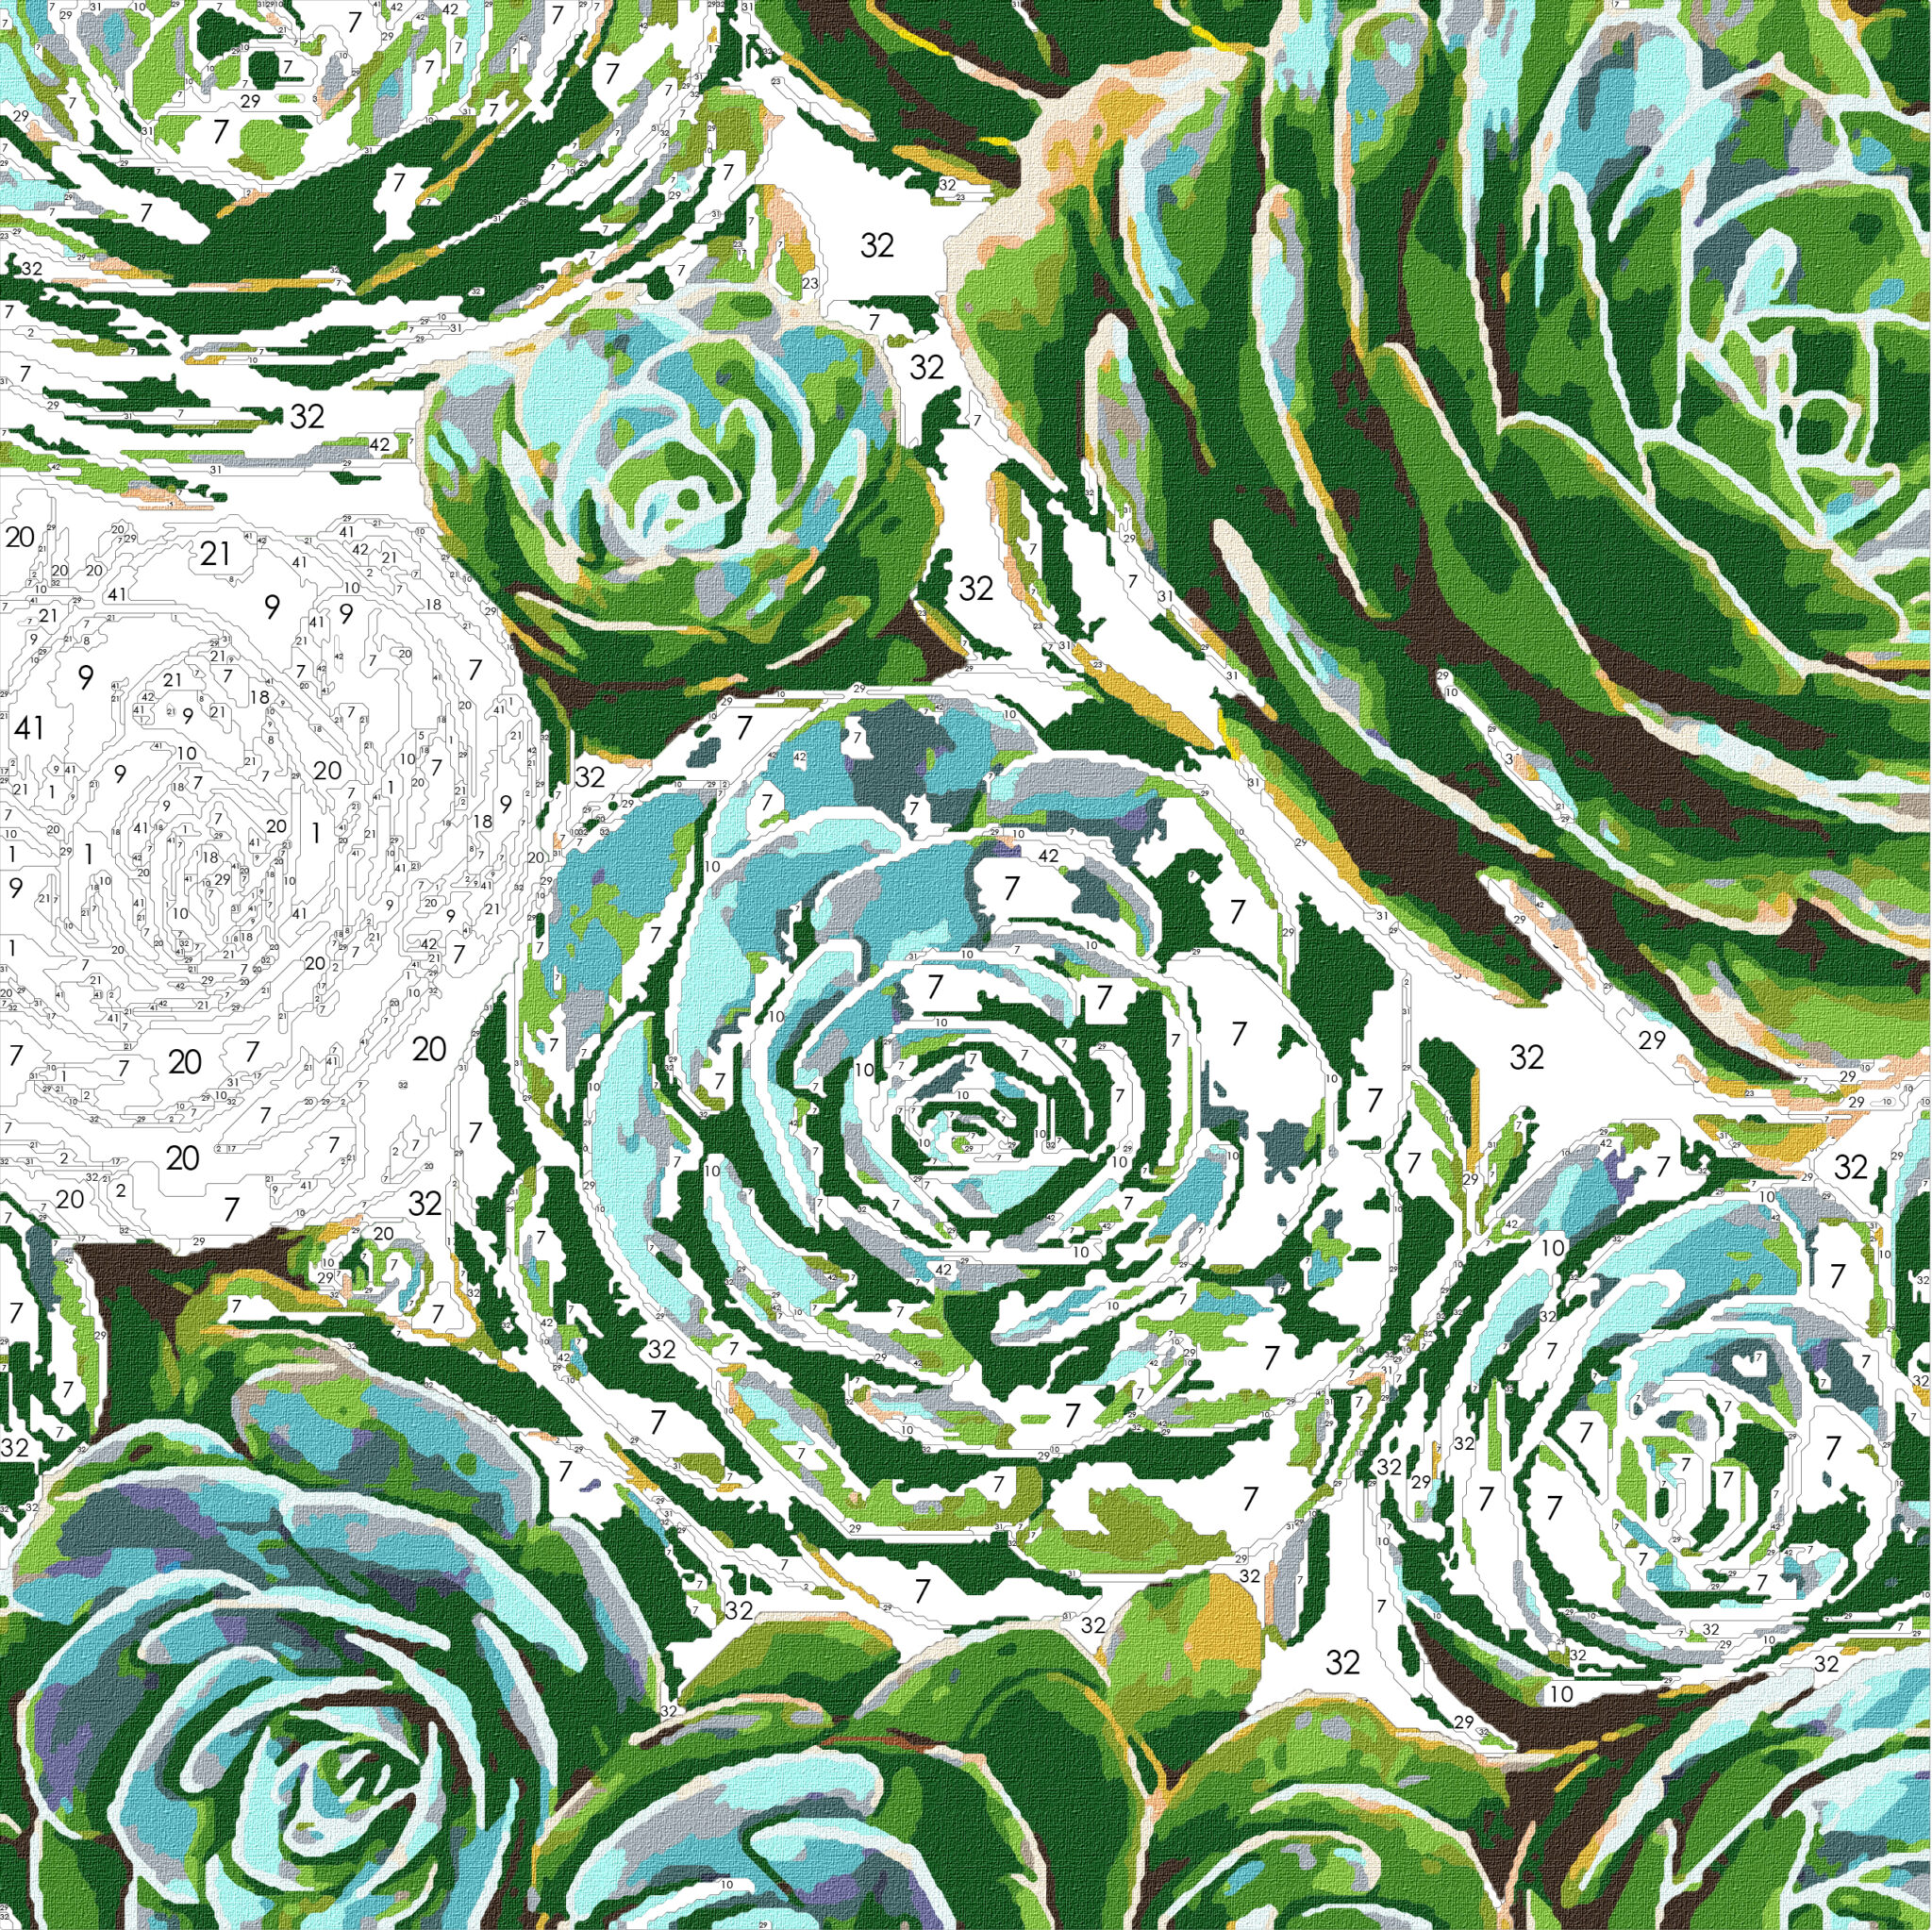 Hens & Chicks | EasyArtsy Paint by Number